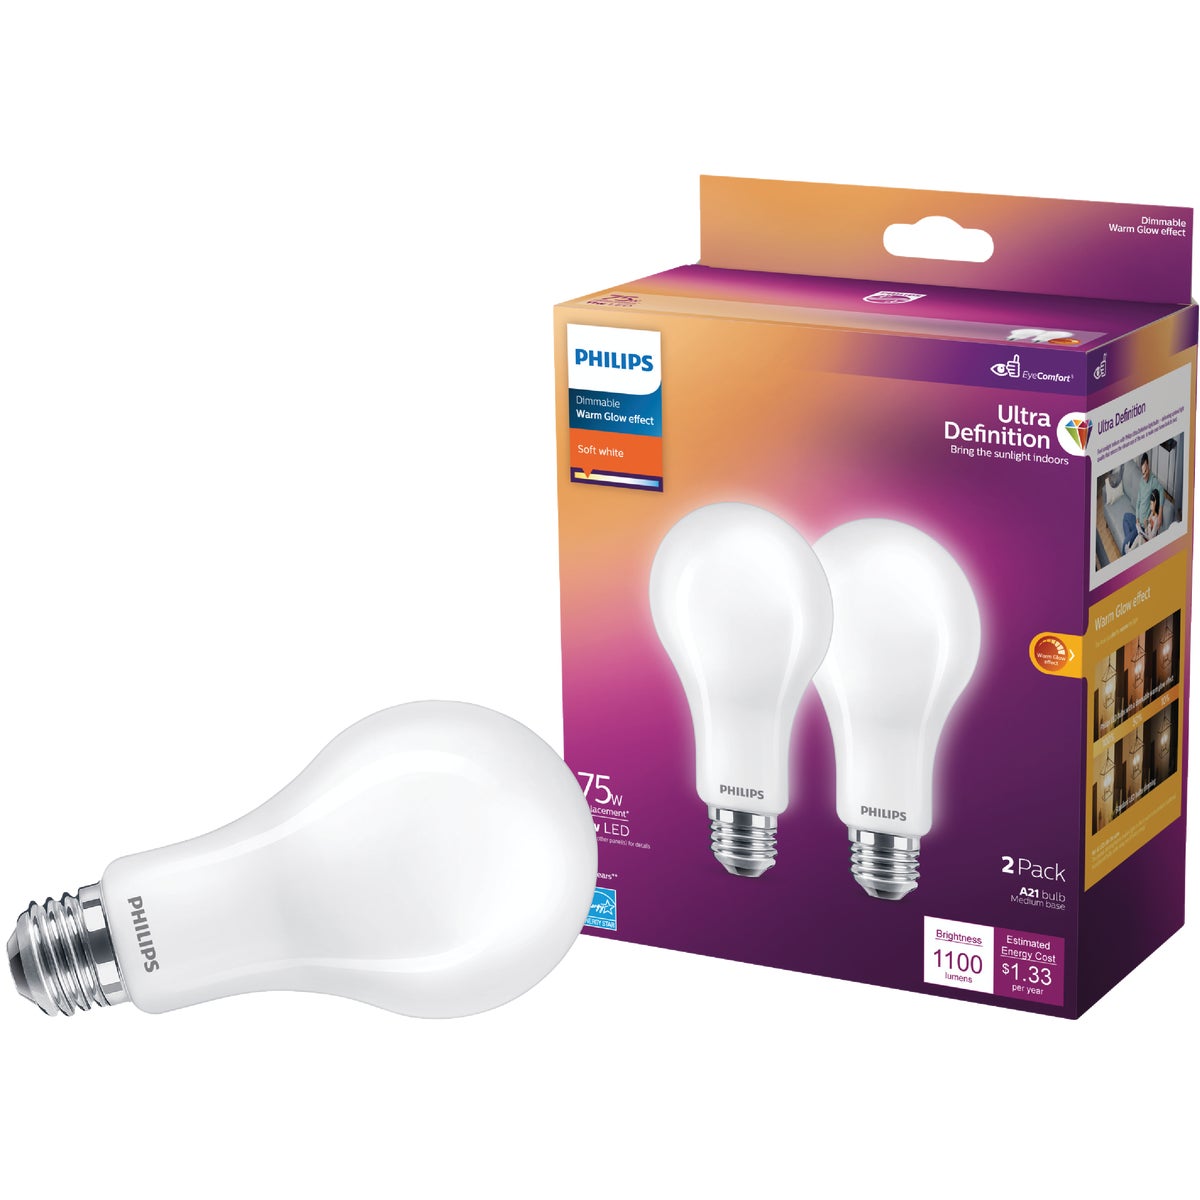 Philips 573493 Philips Ultra Definition Warm Glow 75W Equivalent Soft White A21 Medium LED Light Bulb (2-Pack) 573493